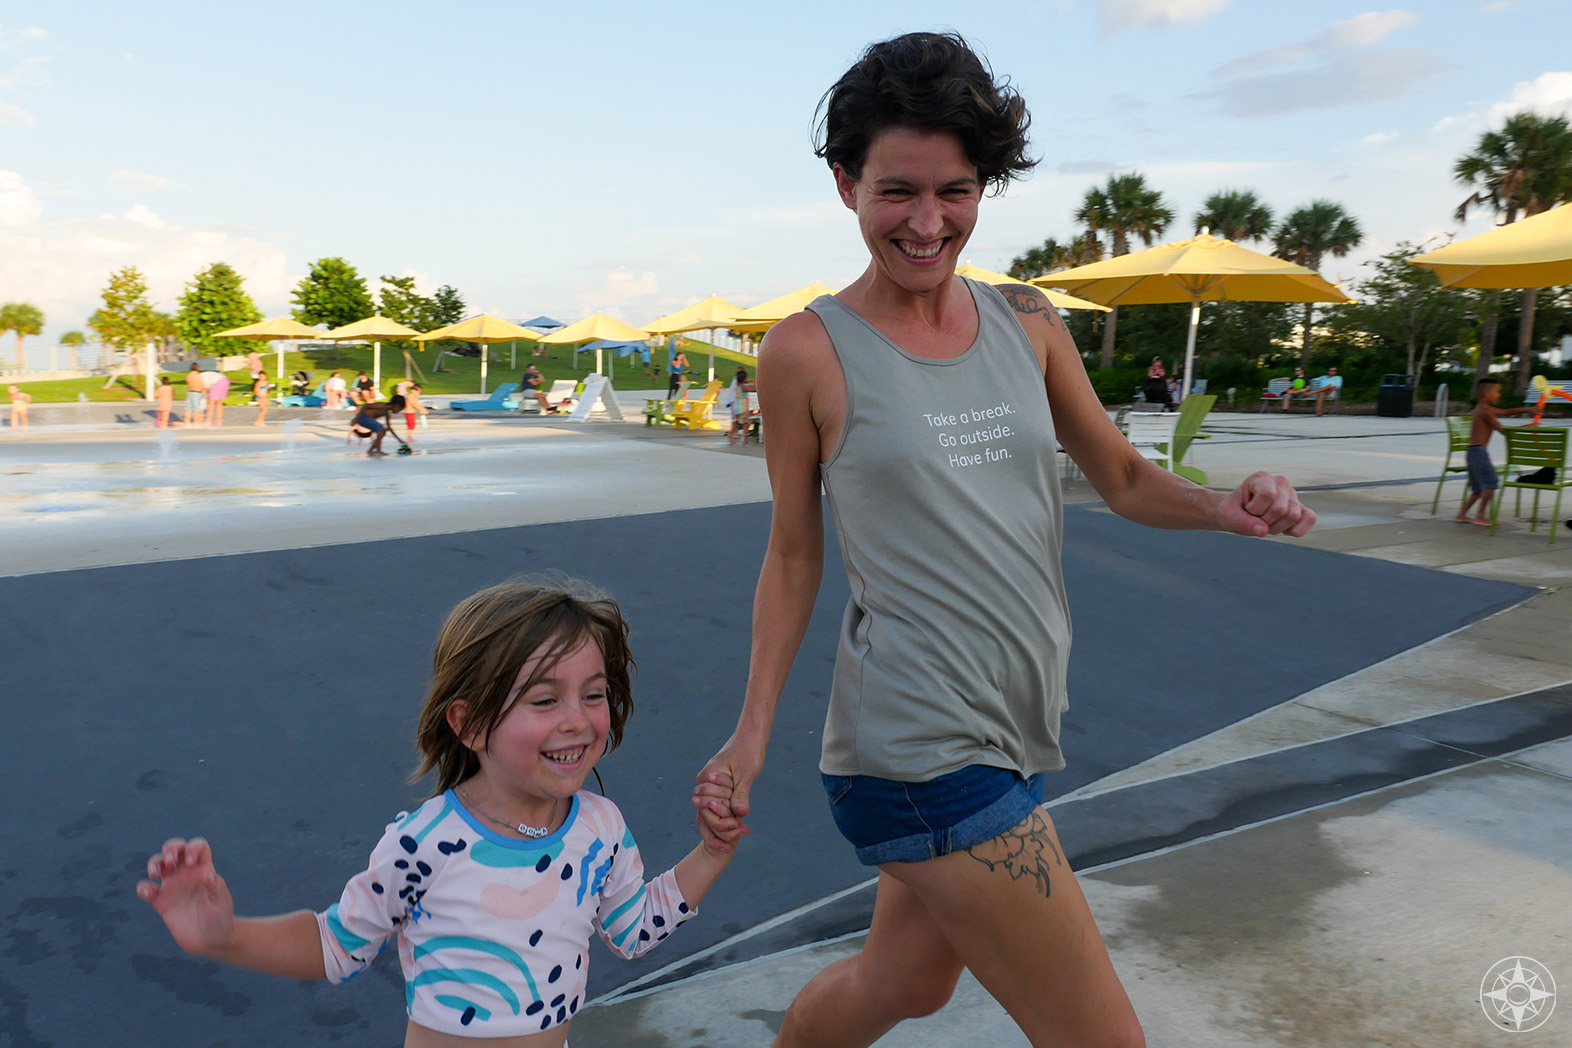 Mother and daughter laughing, running, St Pete Pier water park, Take a Break. Go outside. Have fun. first Happier Place Tank Top, cotton, racerback, titanium grey